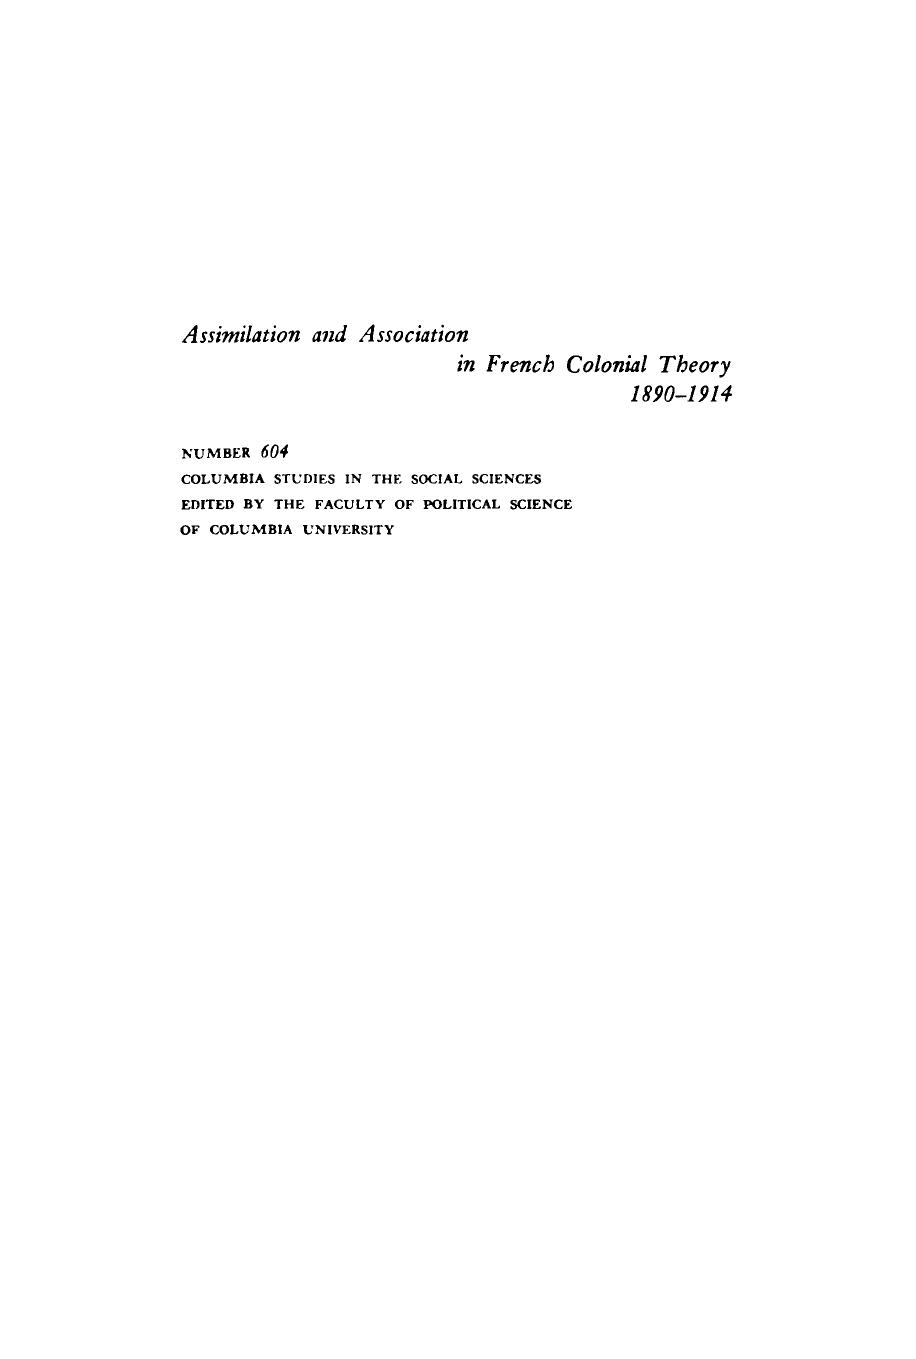 Assimilation and Association in French Colonial Theory 1890â1914 by Raymond F. Betts